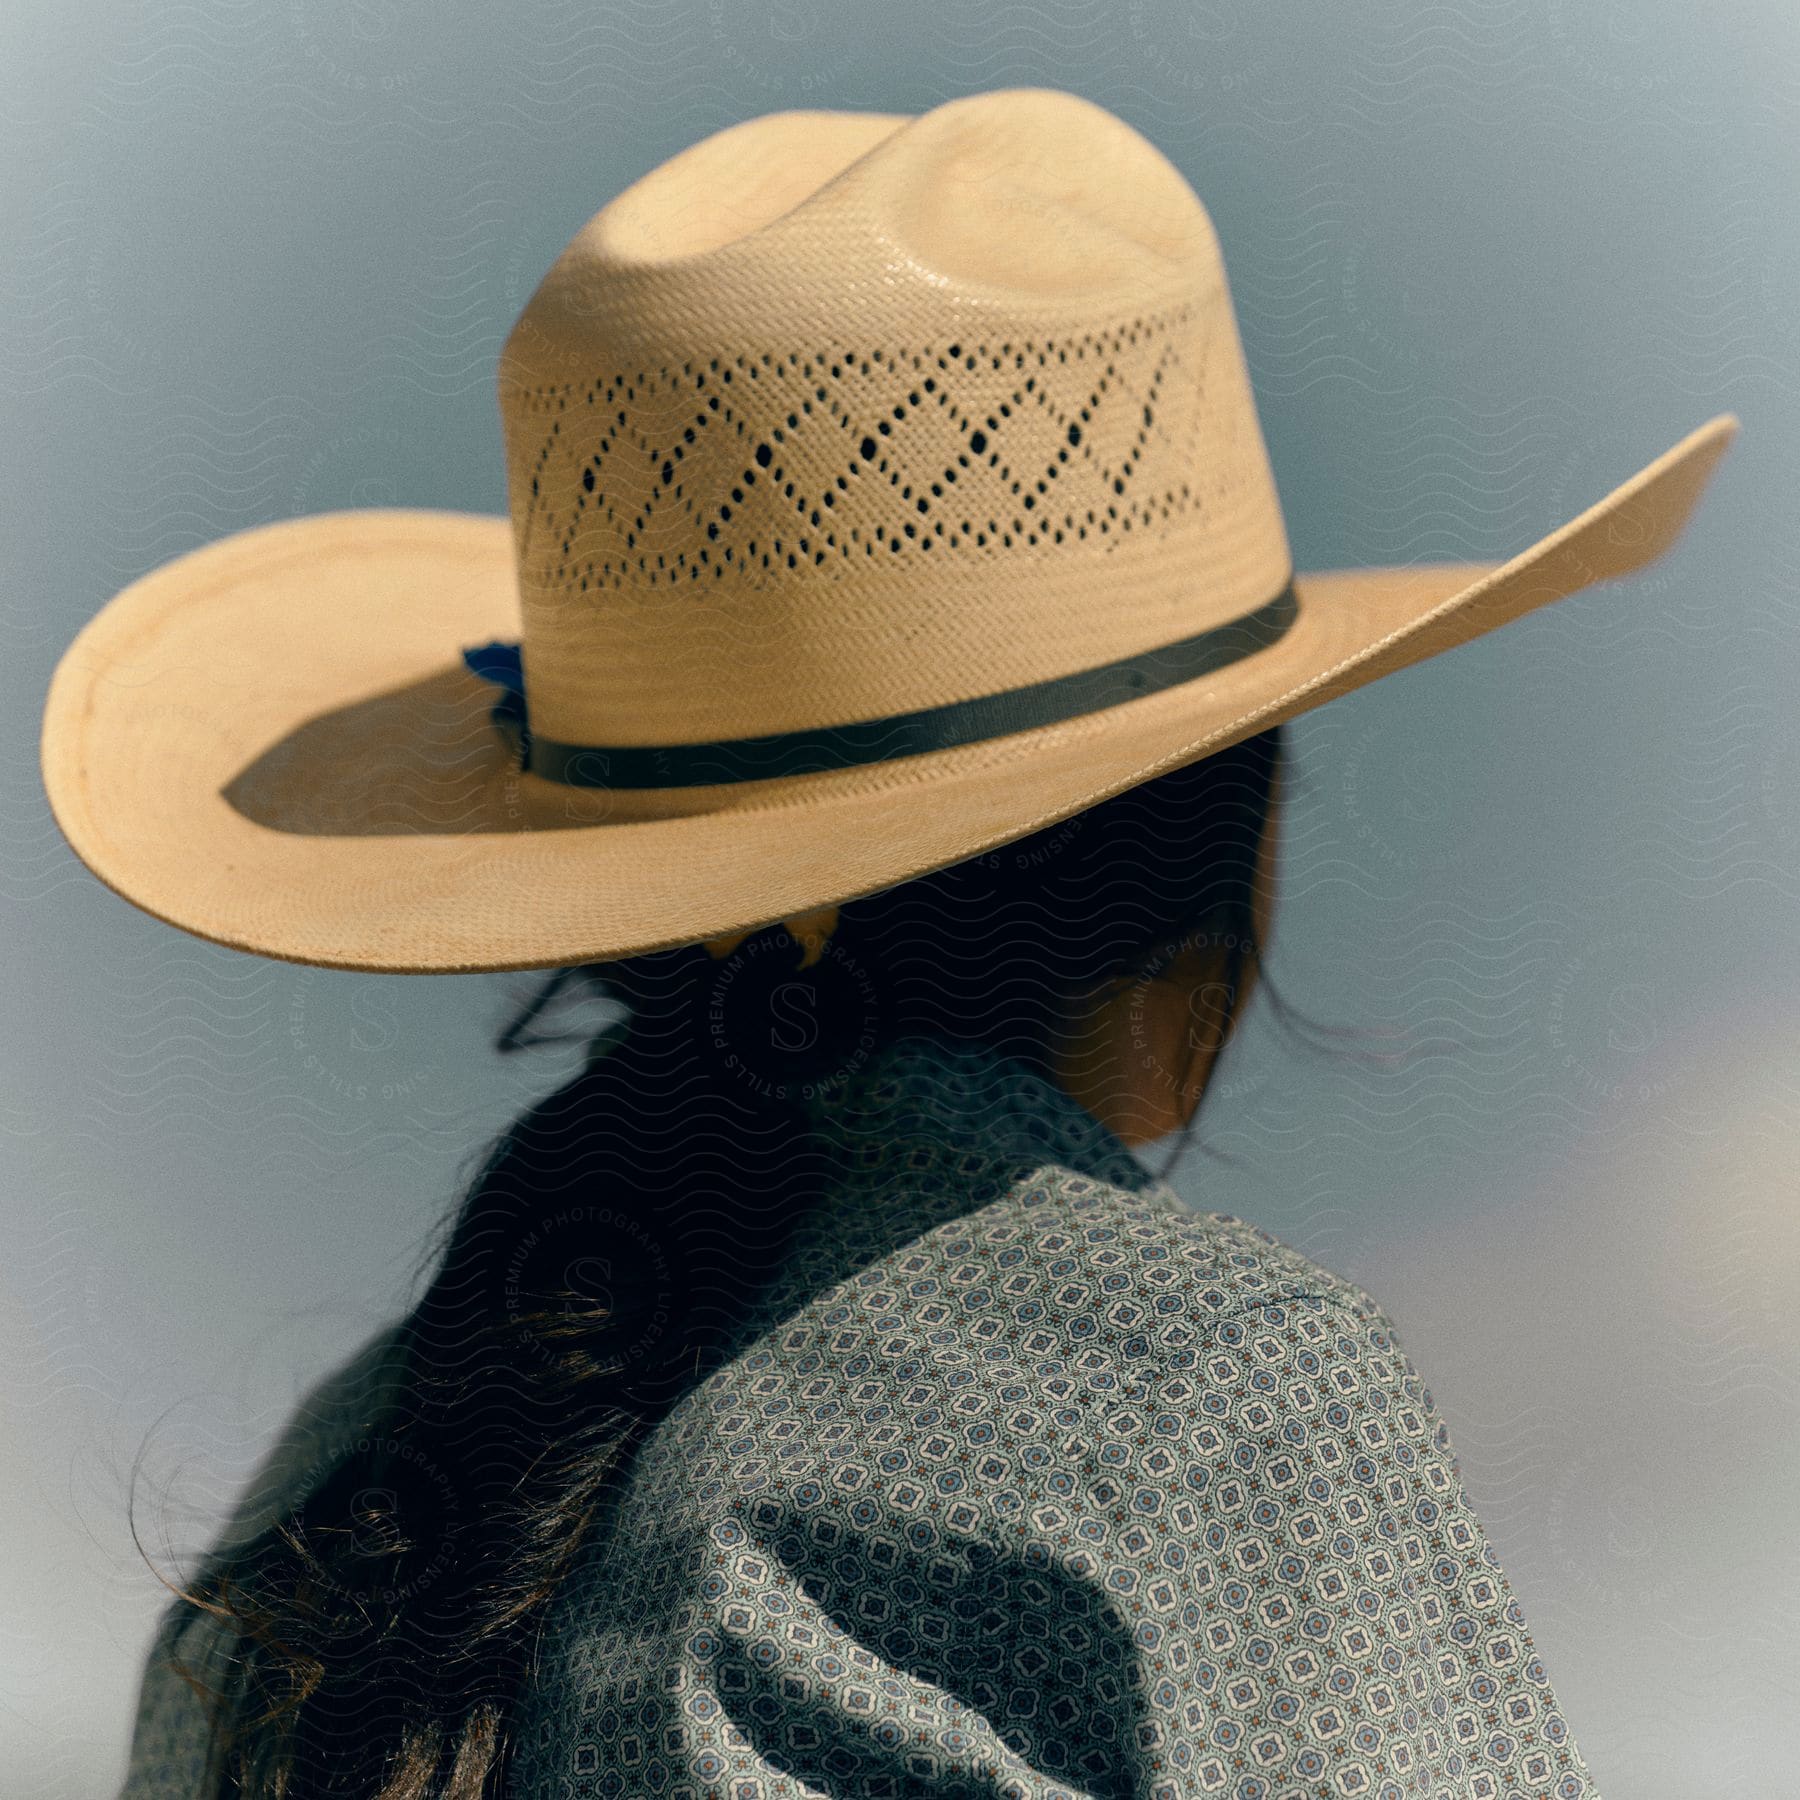 A woman is wearing a wide-brimmed sun hat and a textured shirt